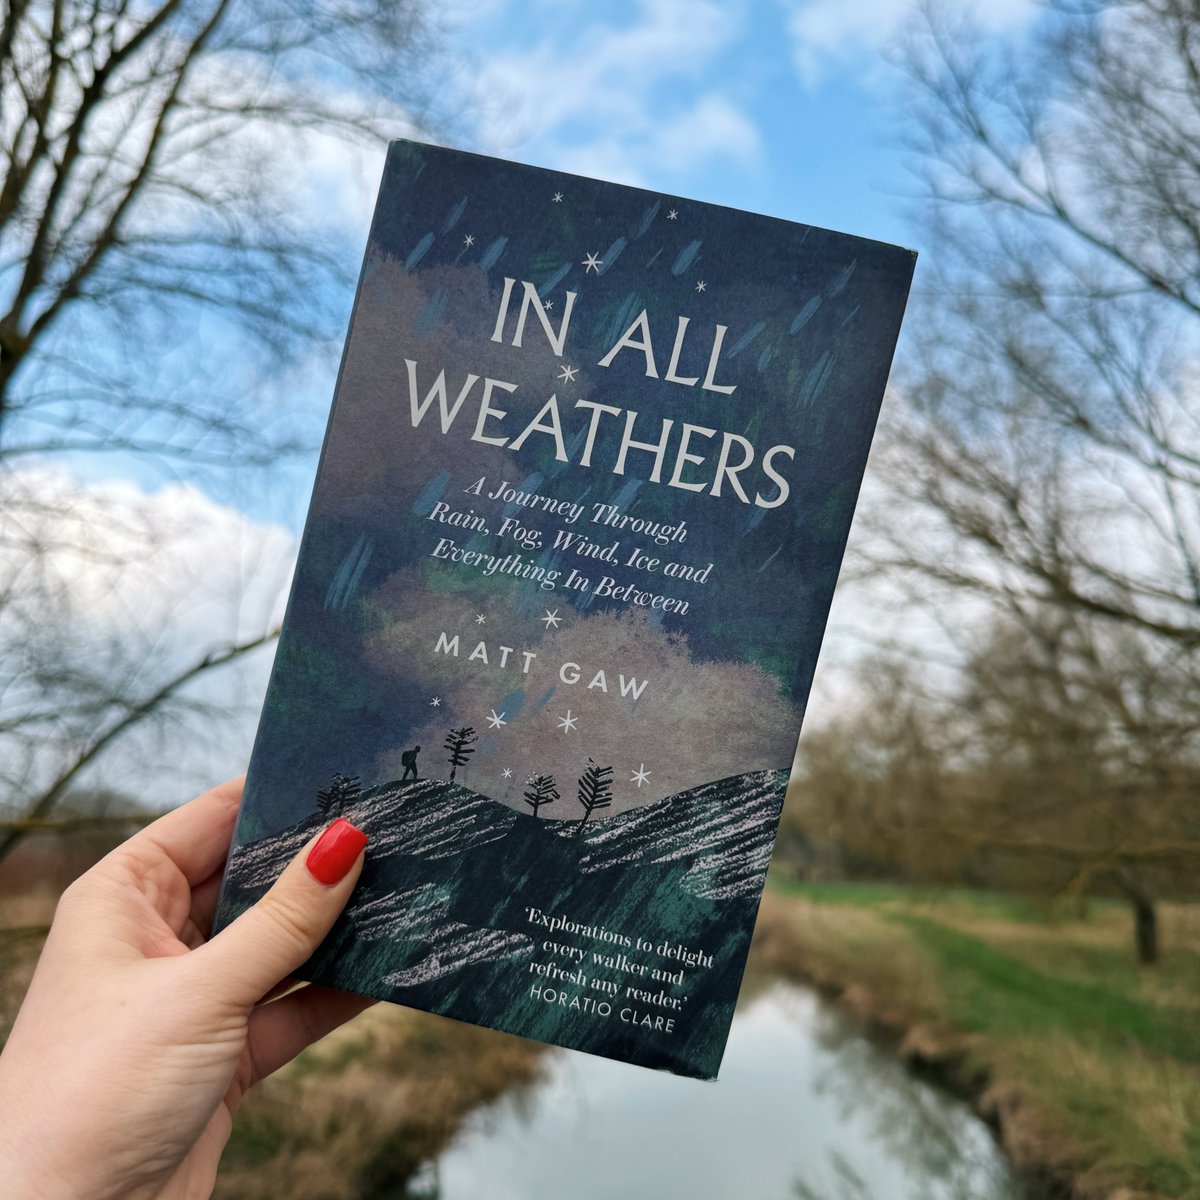 ‘In his glorious ode to the inclement, author and teacher Matt Gaw reveals how all weathers transform our relationship with the natural world – the secret is to open your senses and immerse yourself' - @ObsMagazine bit.ly/3J3zlOO #weather #InAllWeathers @MattGaw